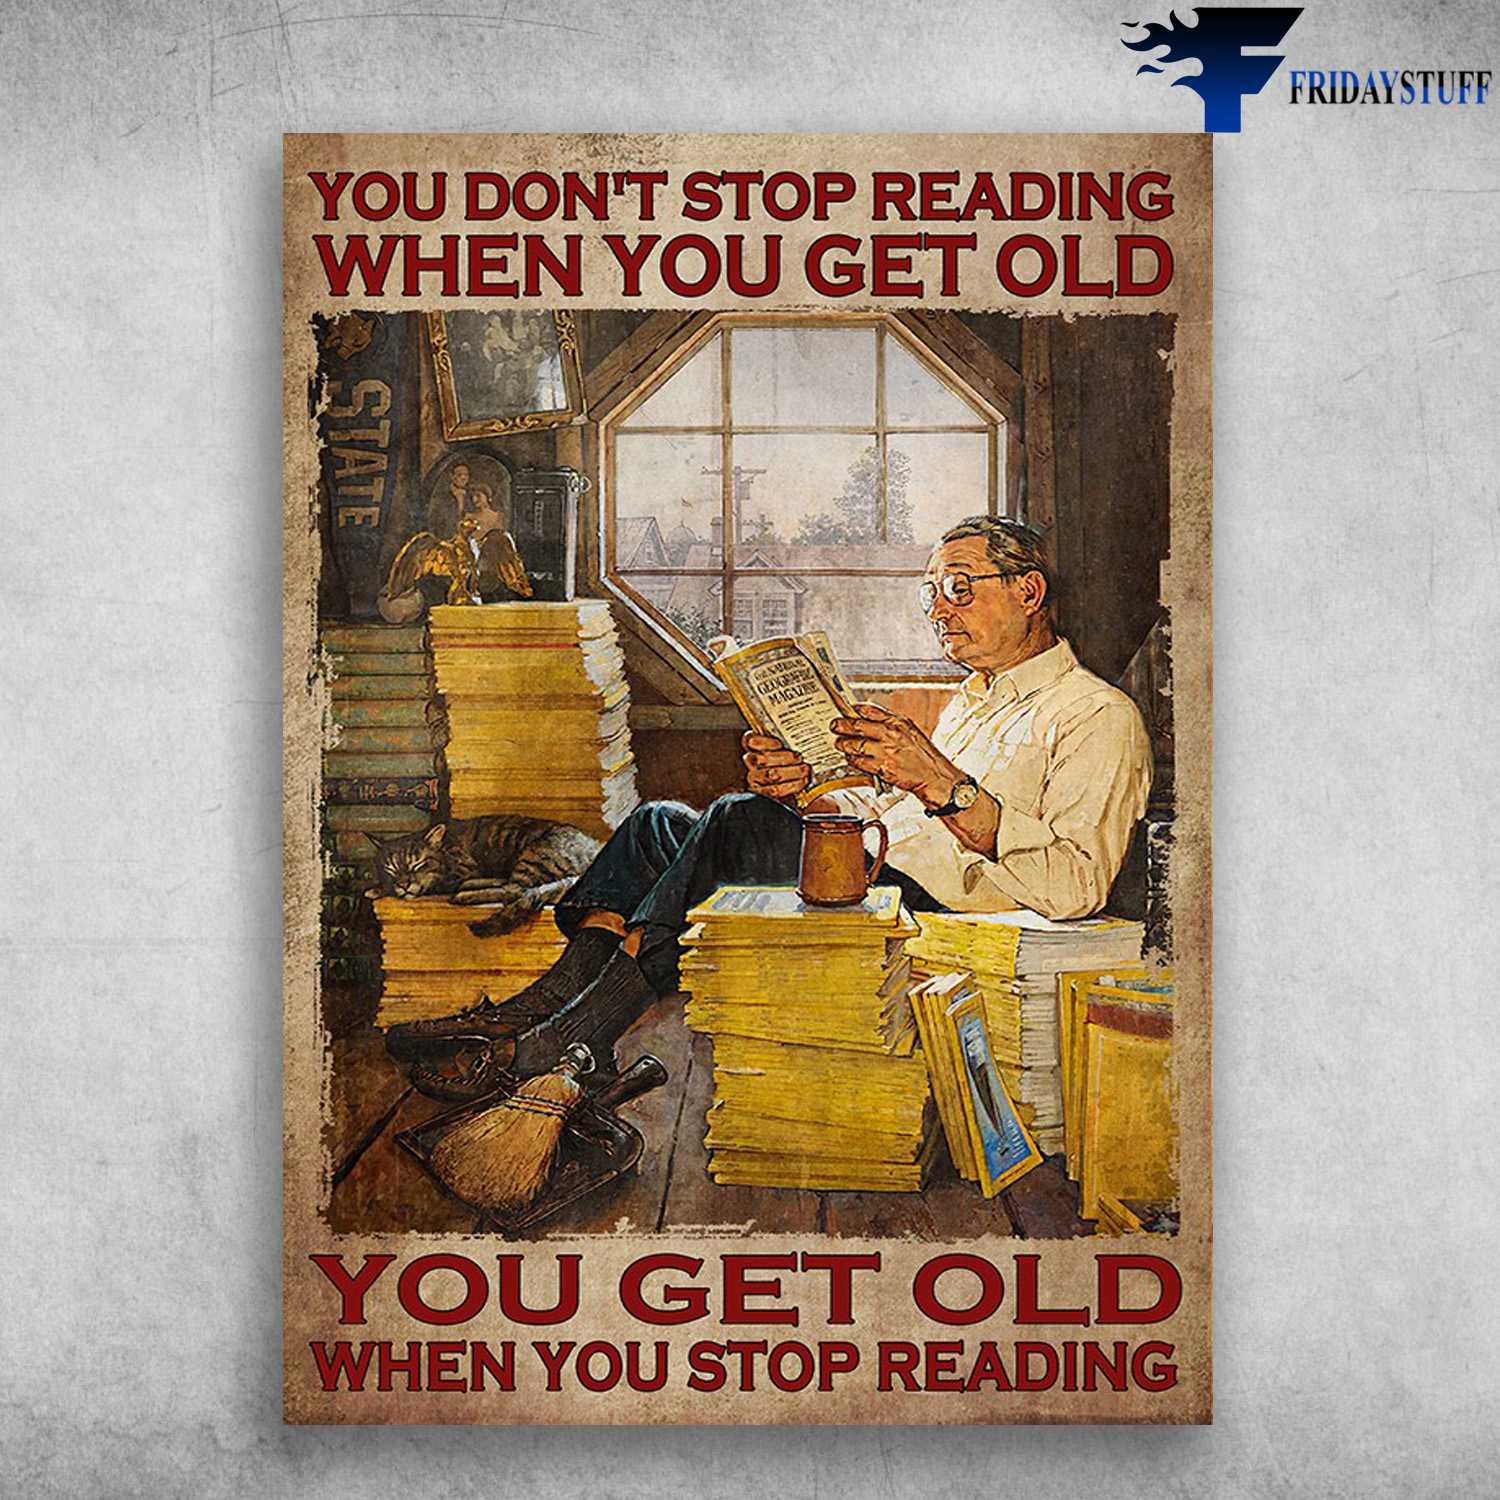 Old Man Reading, Book Lover - You Don't Stop Reading When You Get Old, You Get Old When You Stop Reading,